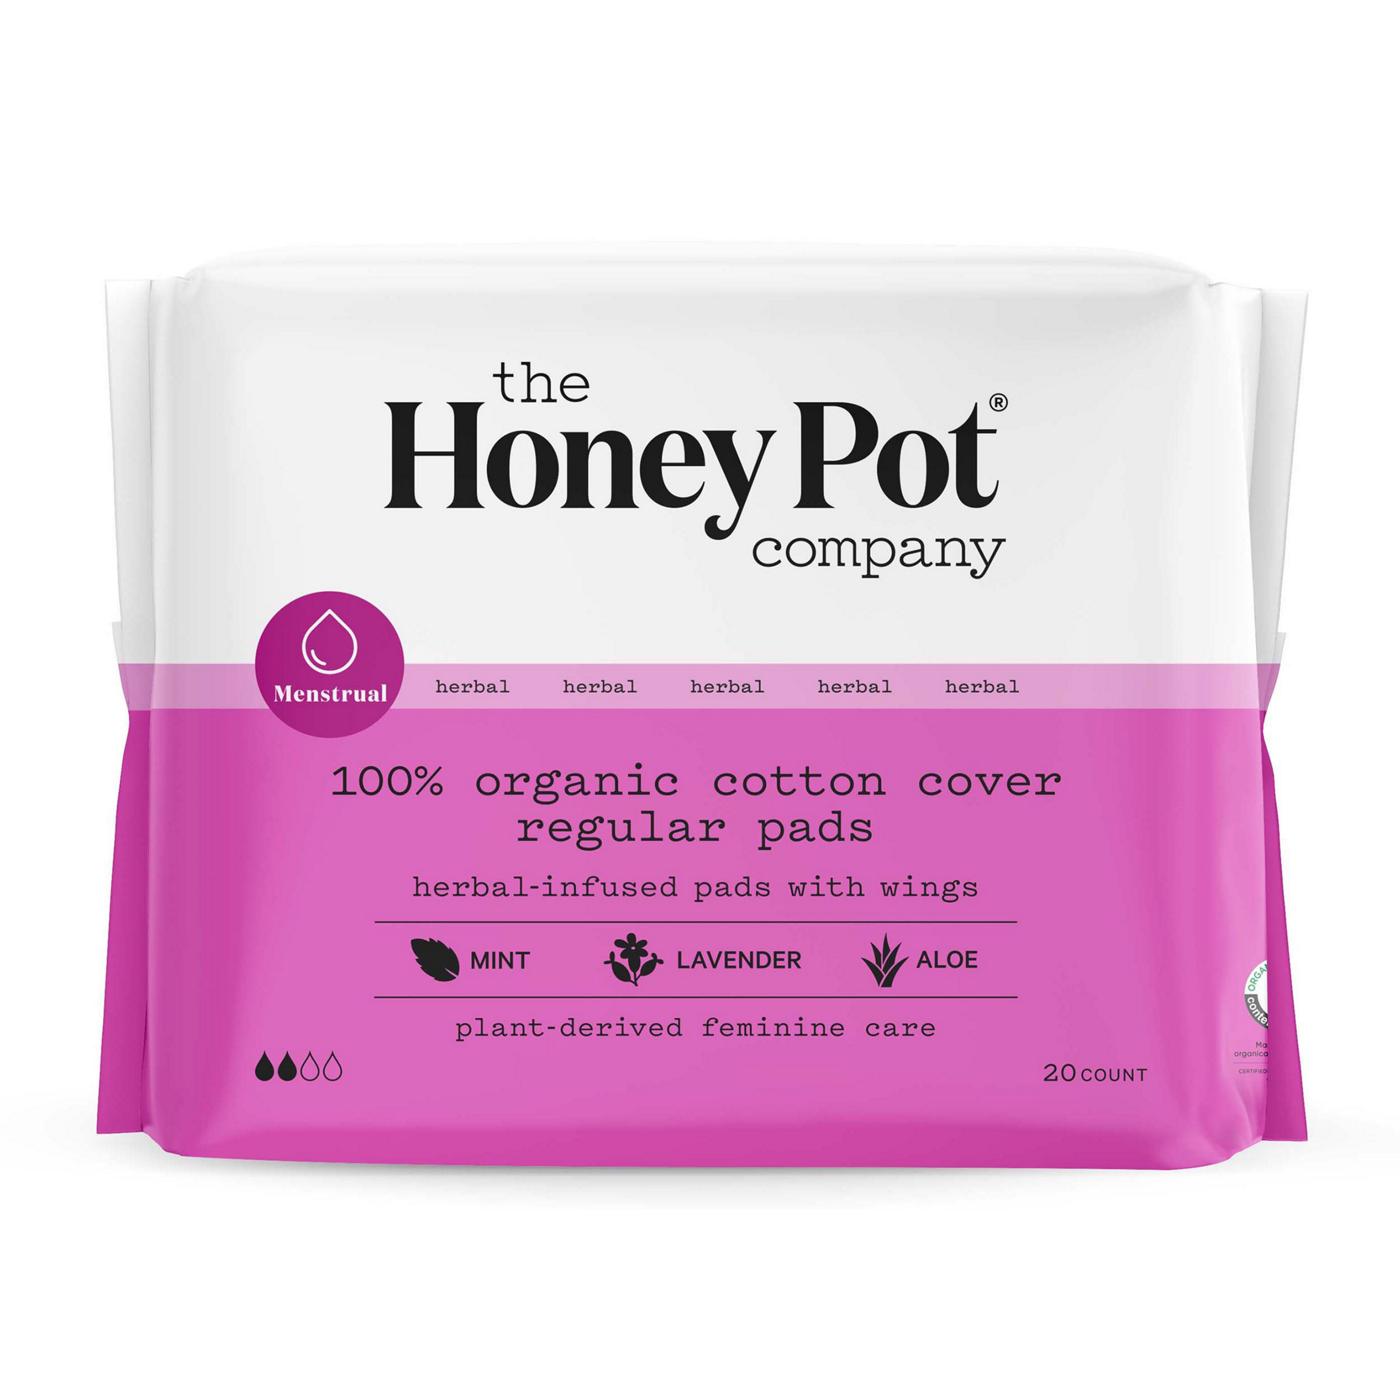 The Honey Pot Herbal-Infused Pads with Wings - Regular ; image 1 of 3